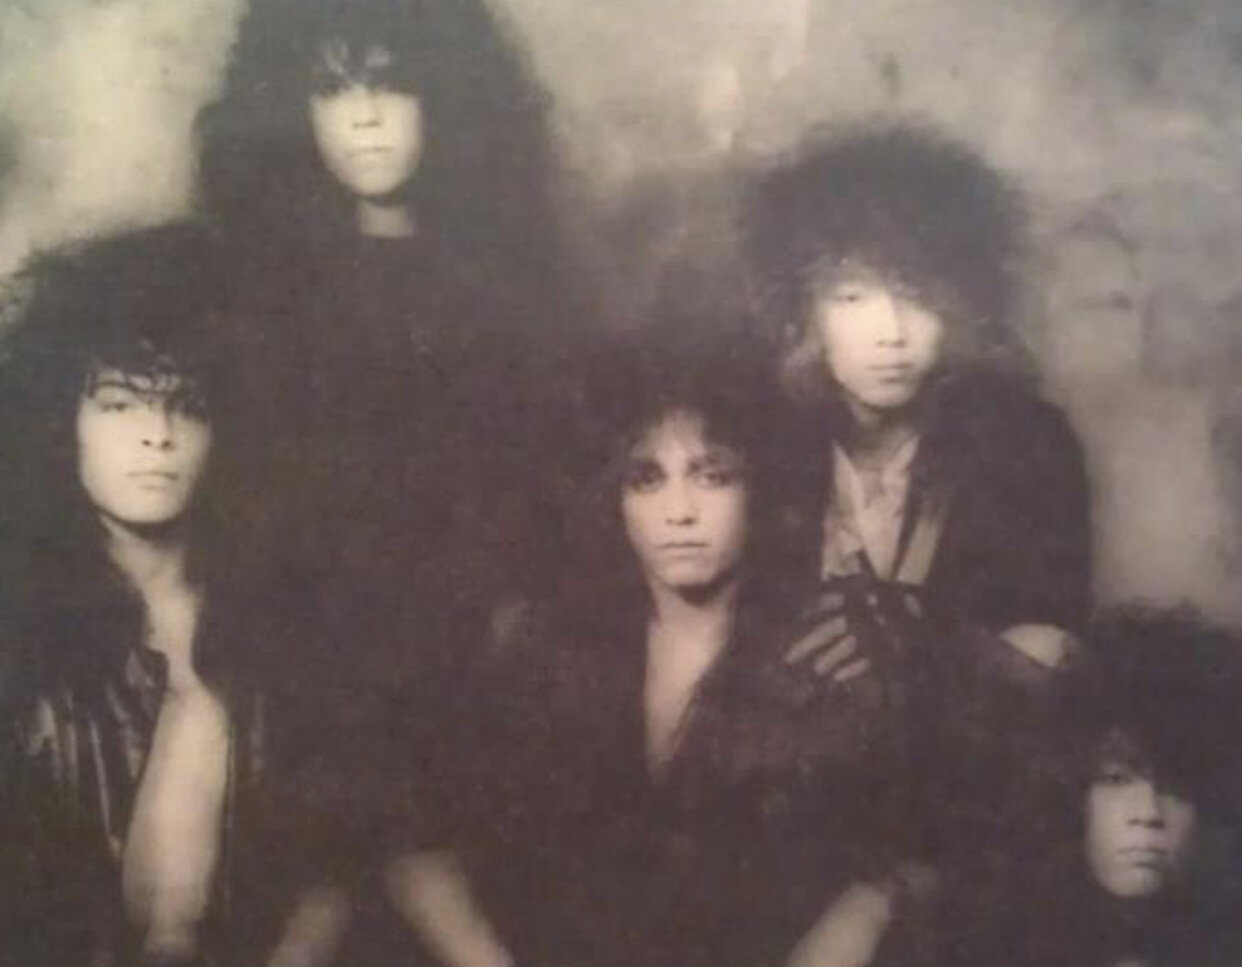 Jayson at 15 in his band Justice